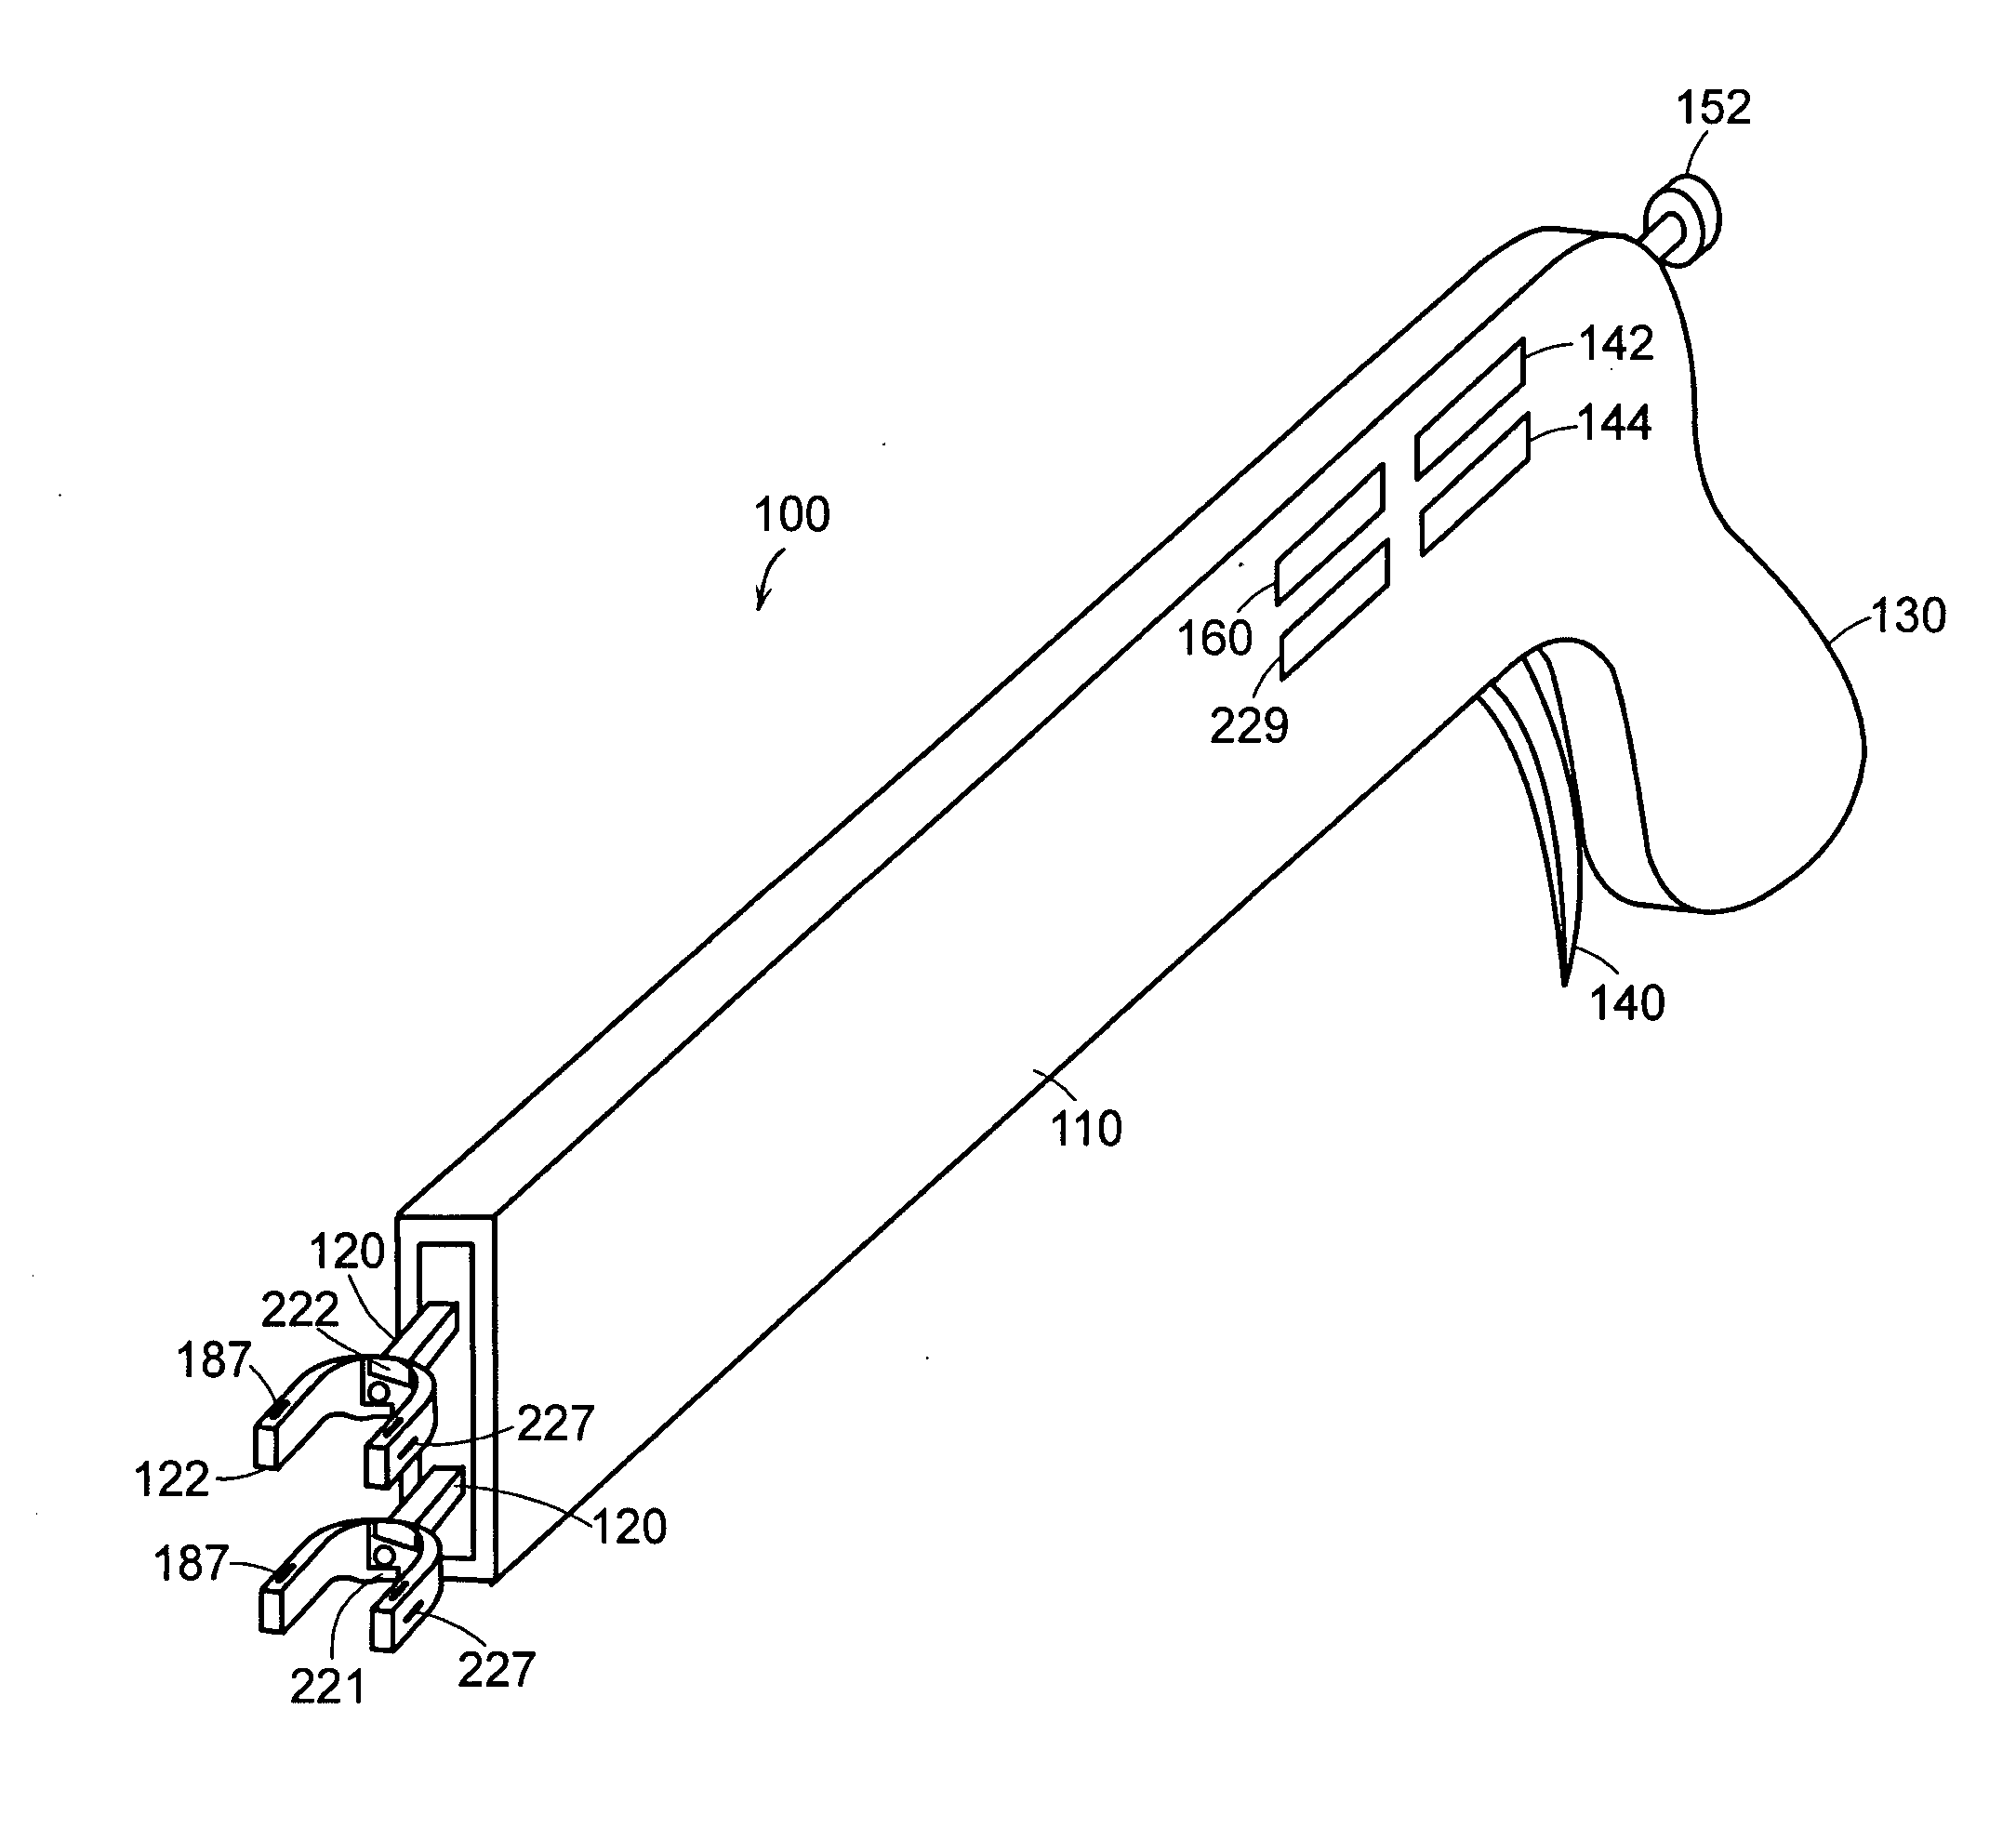 Disc distraction instrument and measuring device